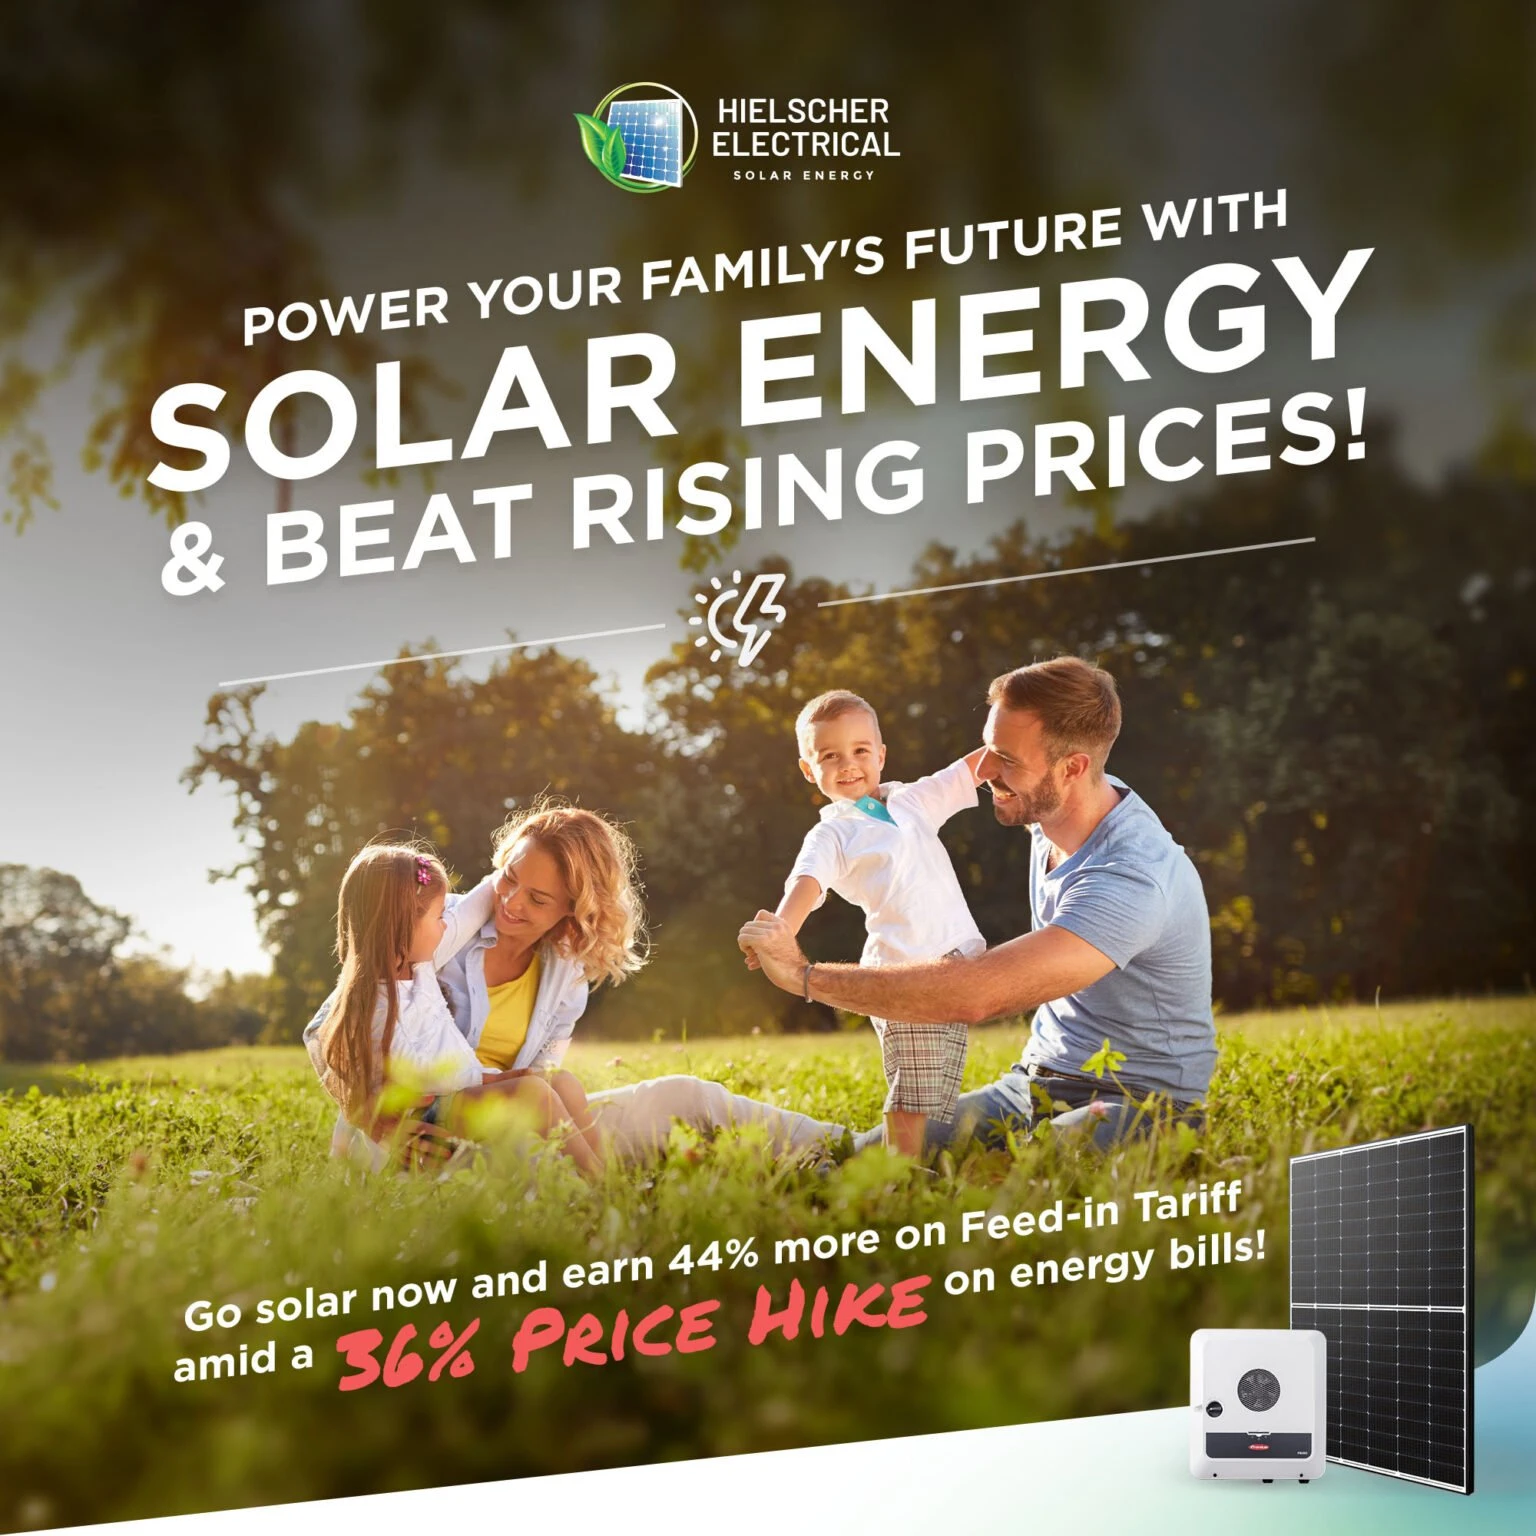 Hielscher Electrical in Cairns offers solar panels to power your family's future and beat rising prices.